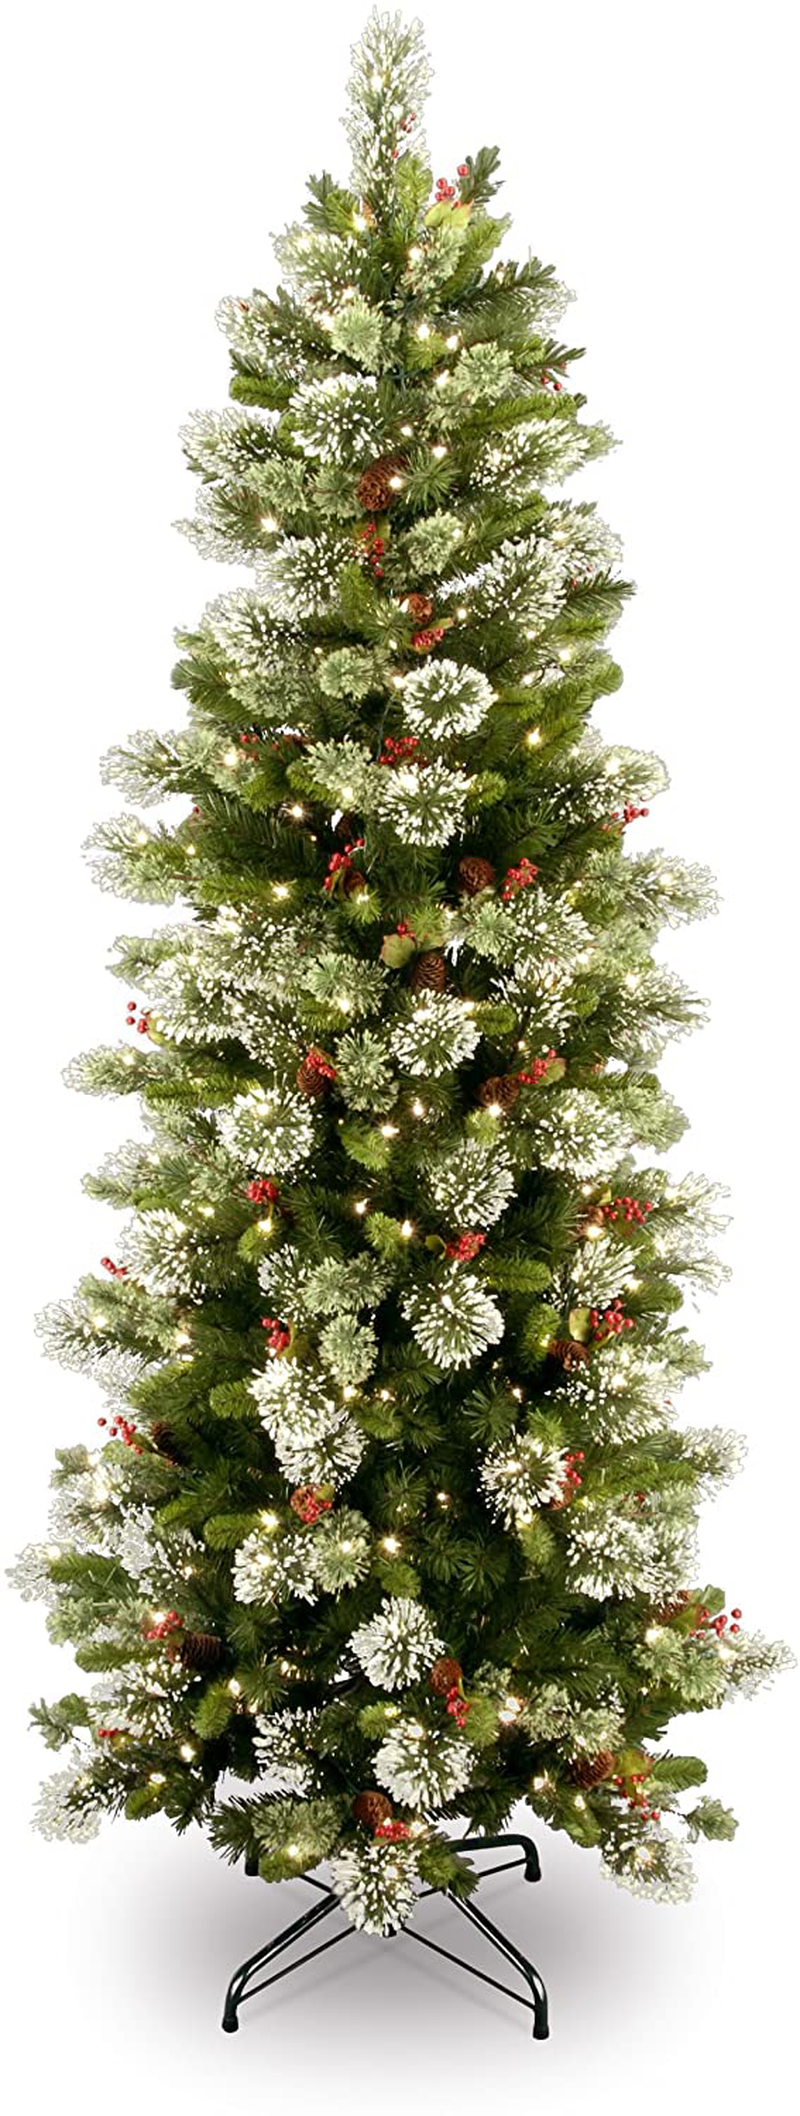 National Tree Company Pre-lit Artificial Christmas Tree | Includes Pre-strung White Lights and Stand | Flocked with Cones, Red Berries and Snowflakes | Wintry Pine Slim - 7.5 ft Home & Garden > Decor > Seasonal & Holiday Decorations > Christmas Tree Stands National Tree Company Slim 7.5 ft 